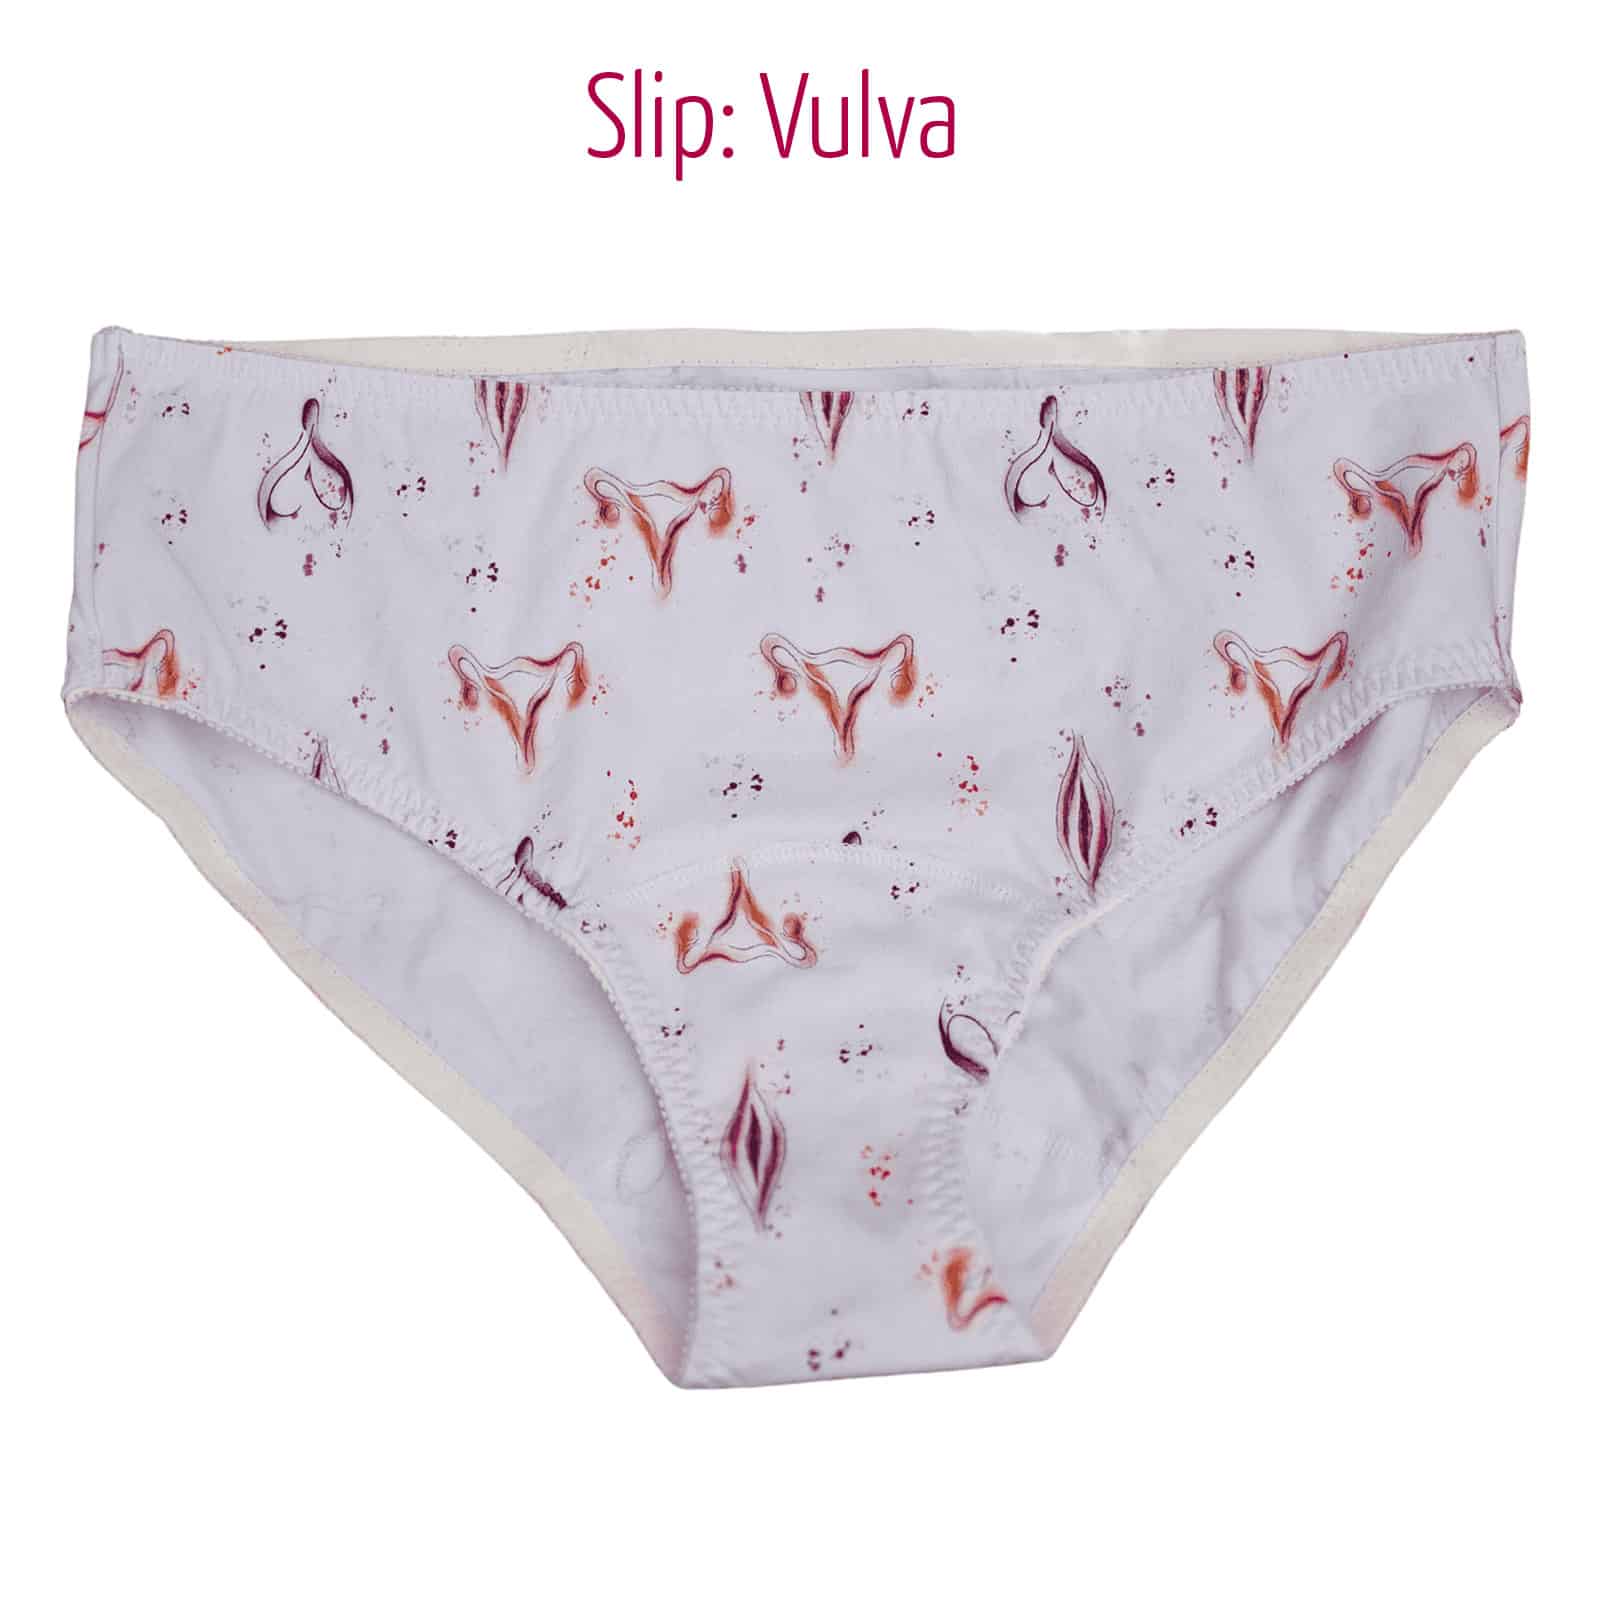 Here's a panty slip for everyone who's sad - #96280391 added by arsyro at  Feels